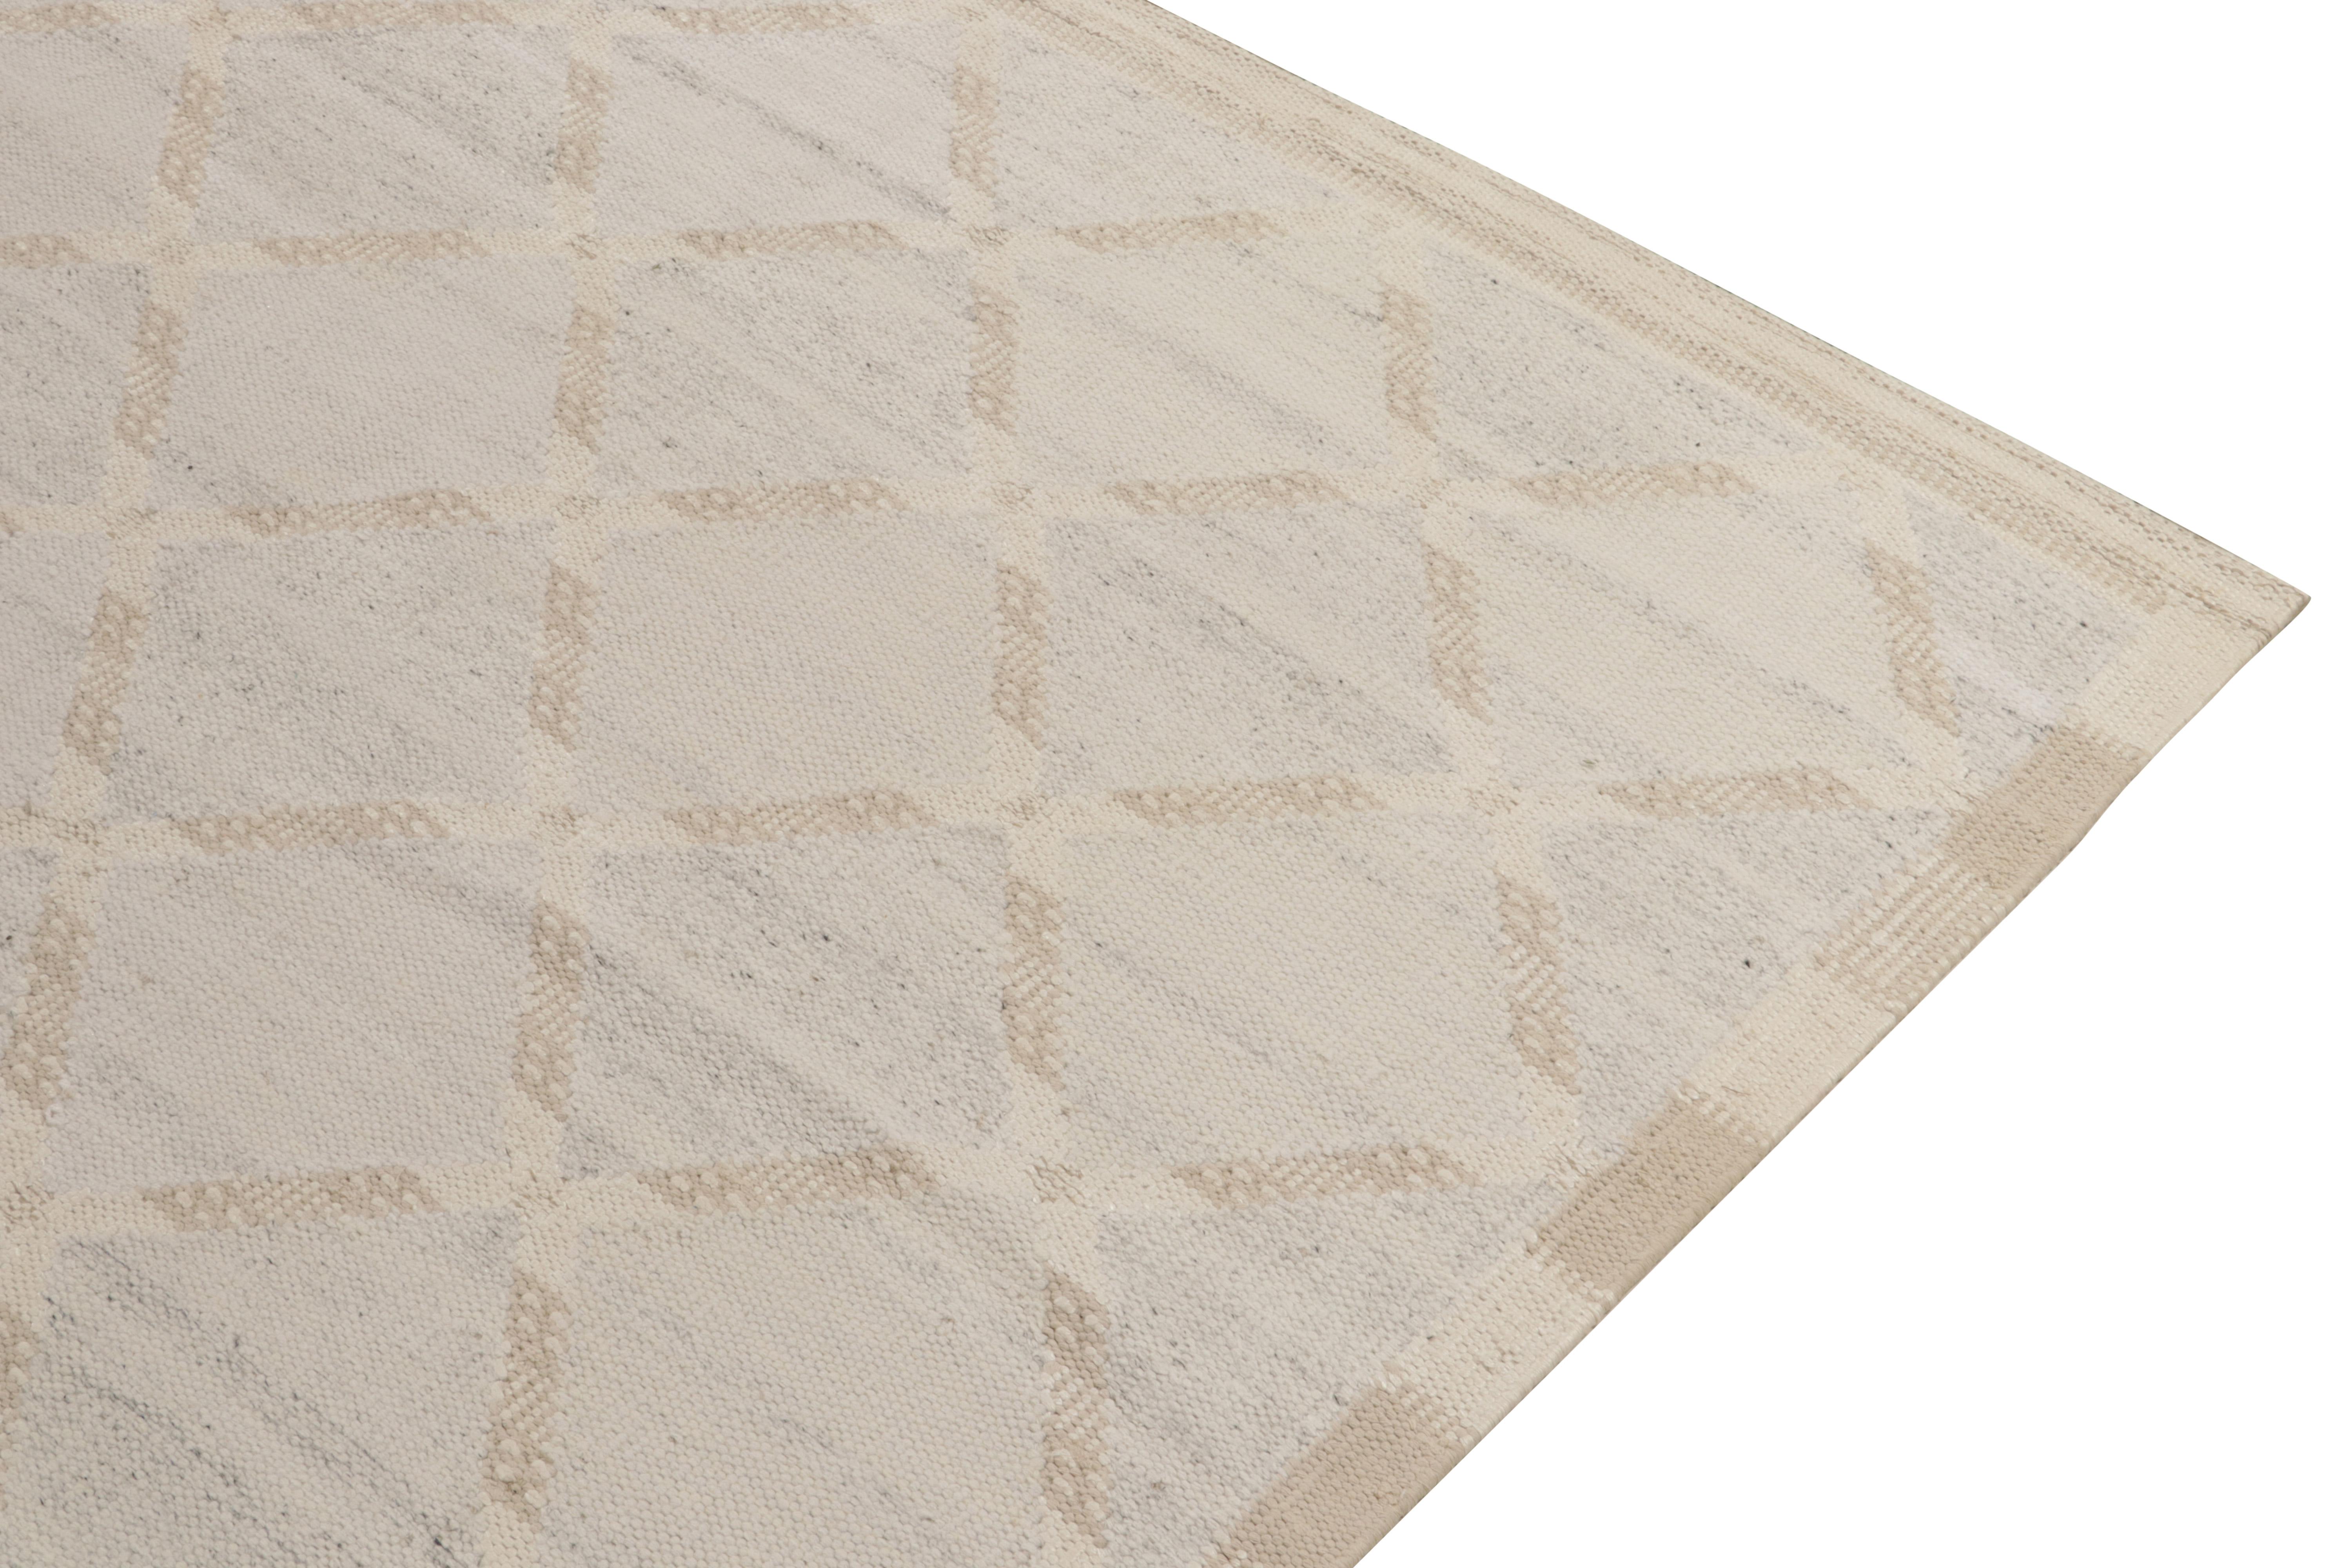 Indian Rug & Kilim’s Scandinavian Style Kilim in Blue, Beige and White Trellis Pattern For Sale